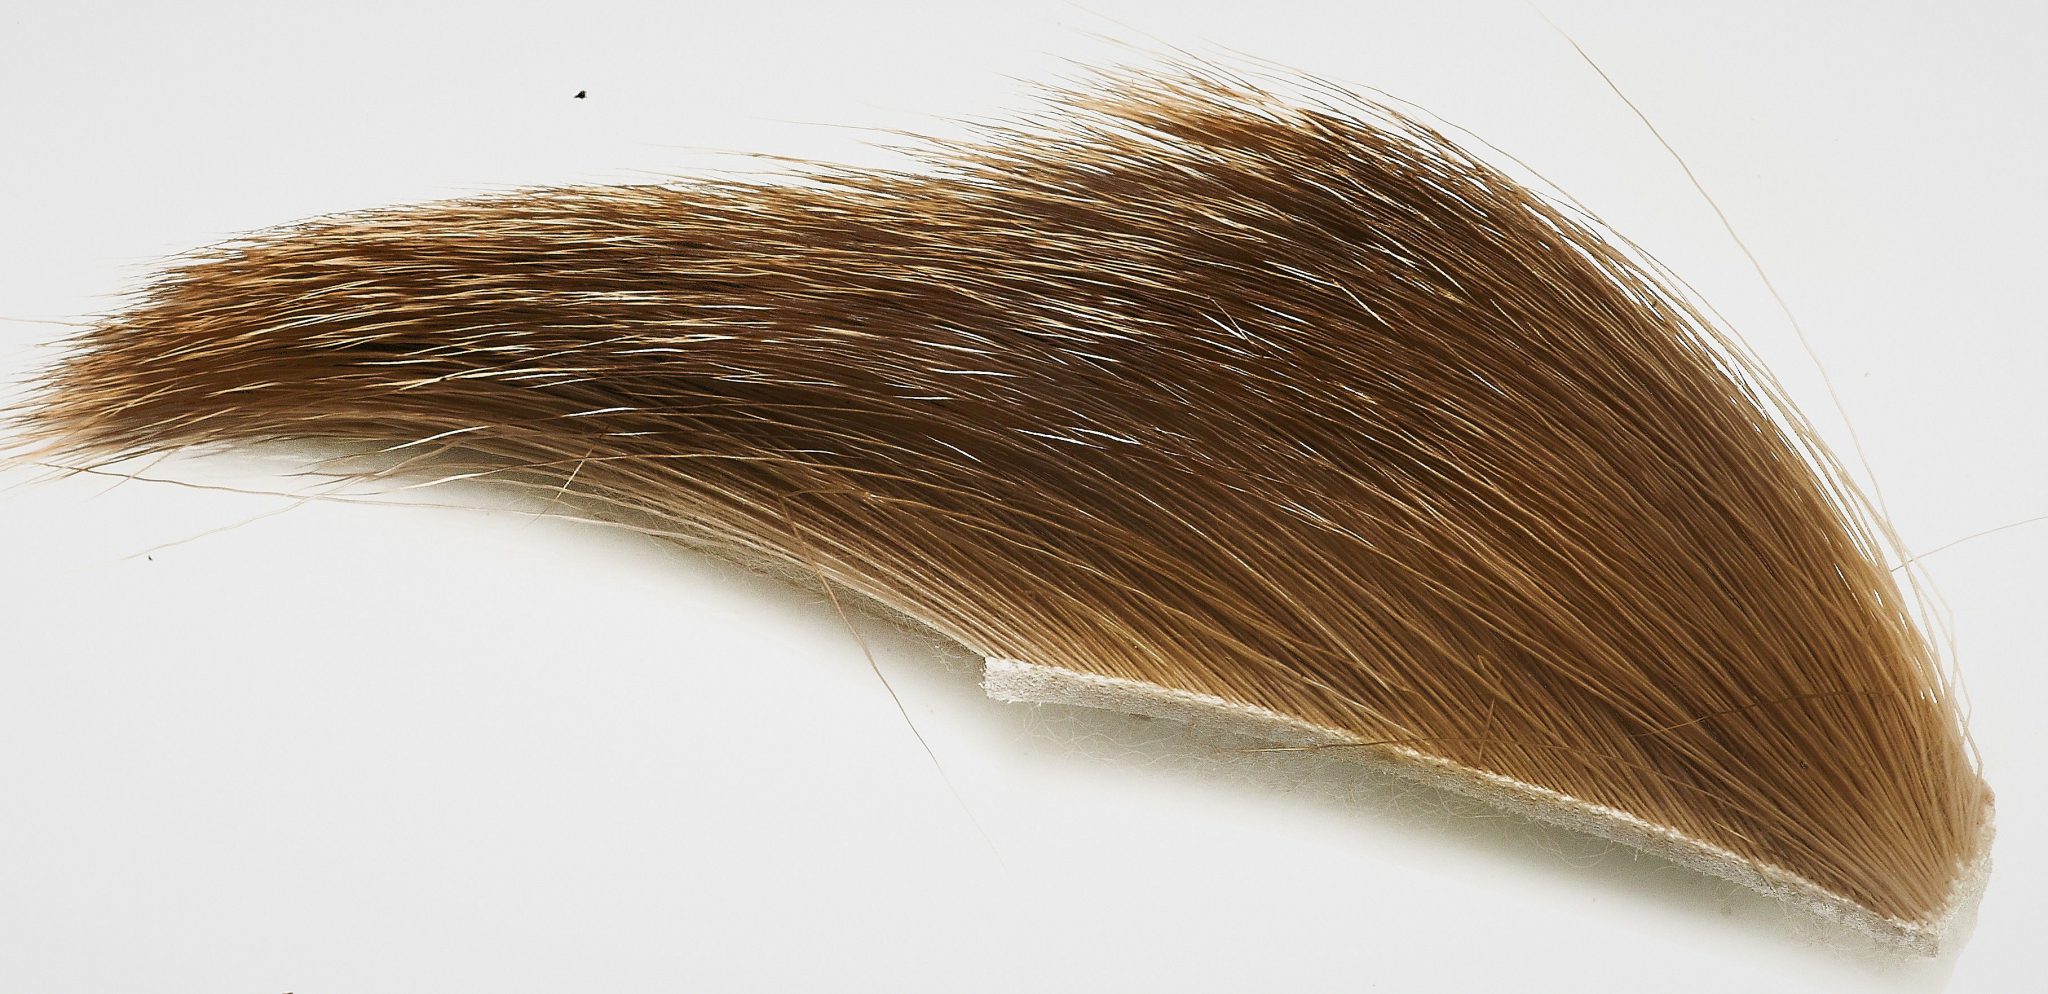 White tail Deer hair - October quality